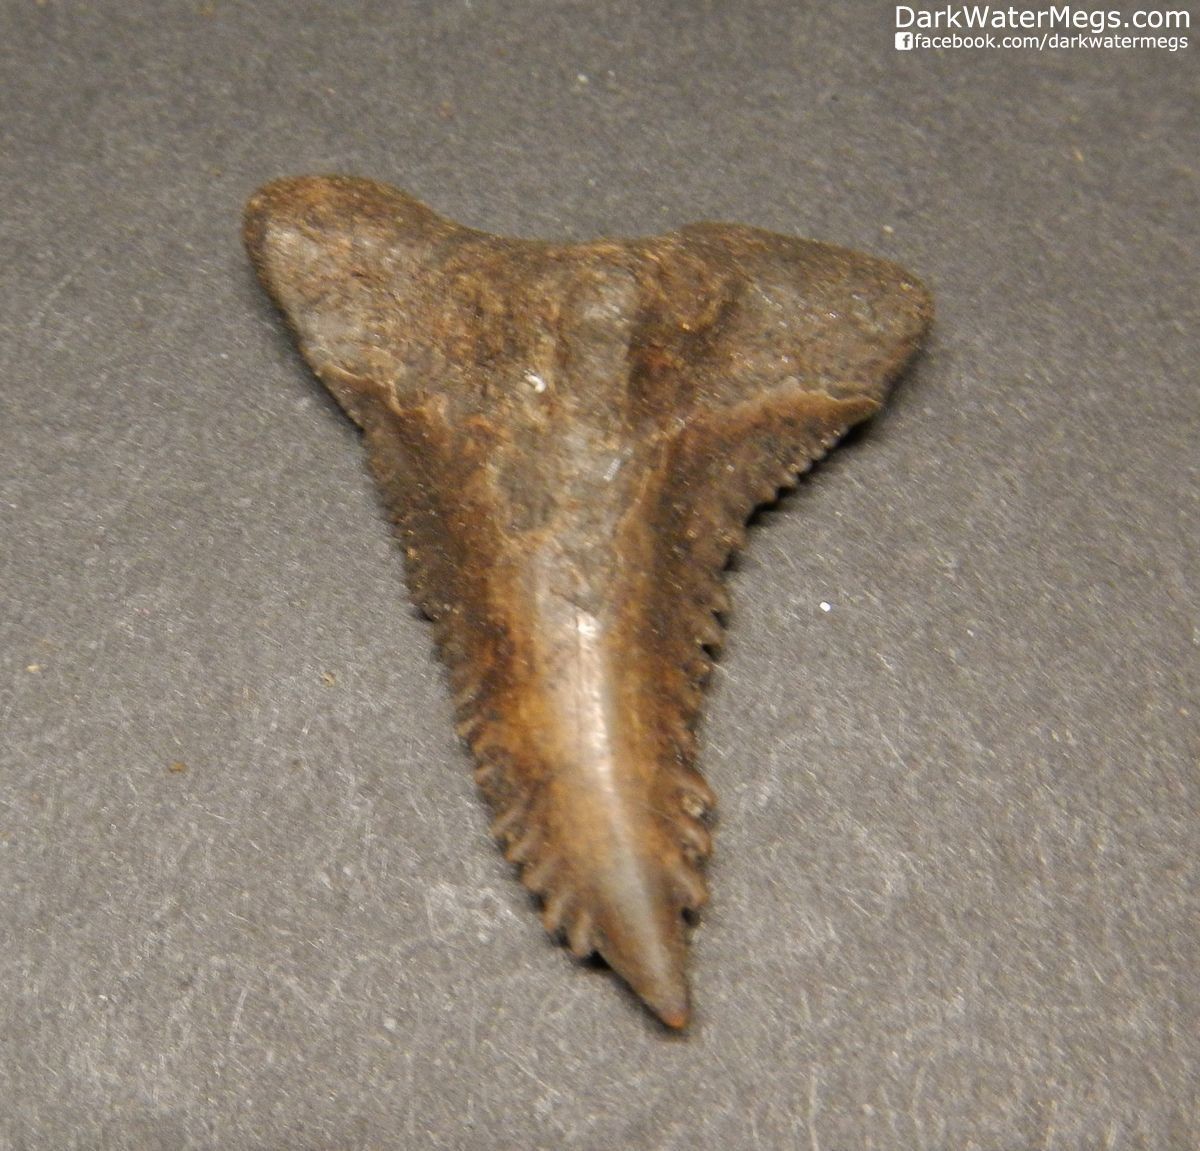 1.35" Dark Brown Hemipristis or "snaggle" fossil shark tooth